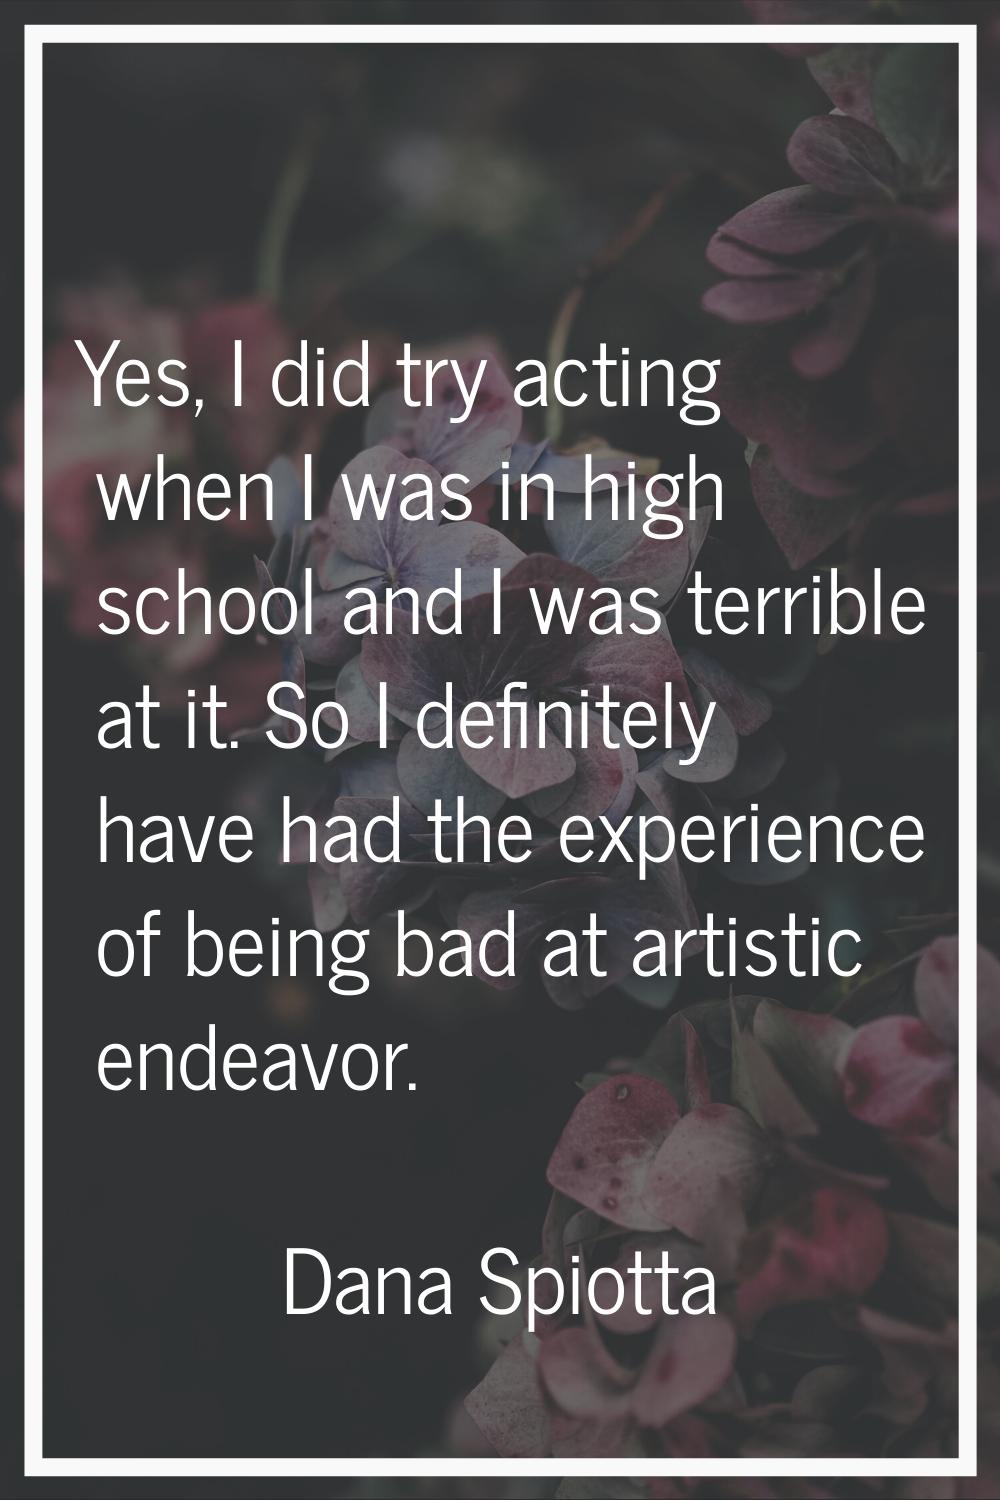 Yes, I did try acting when I was in high school and I was terrible at it. So I definitely have had 